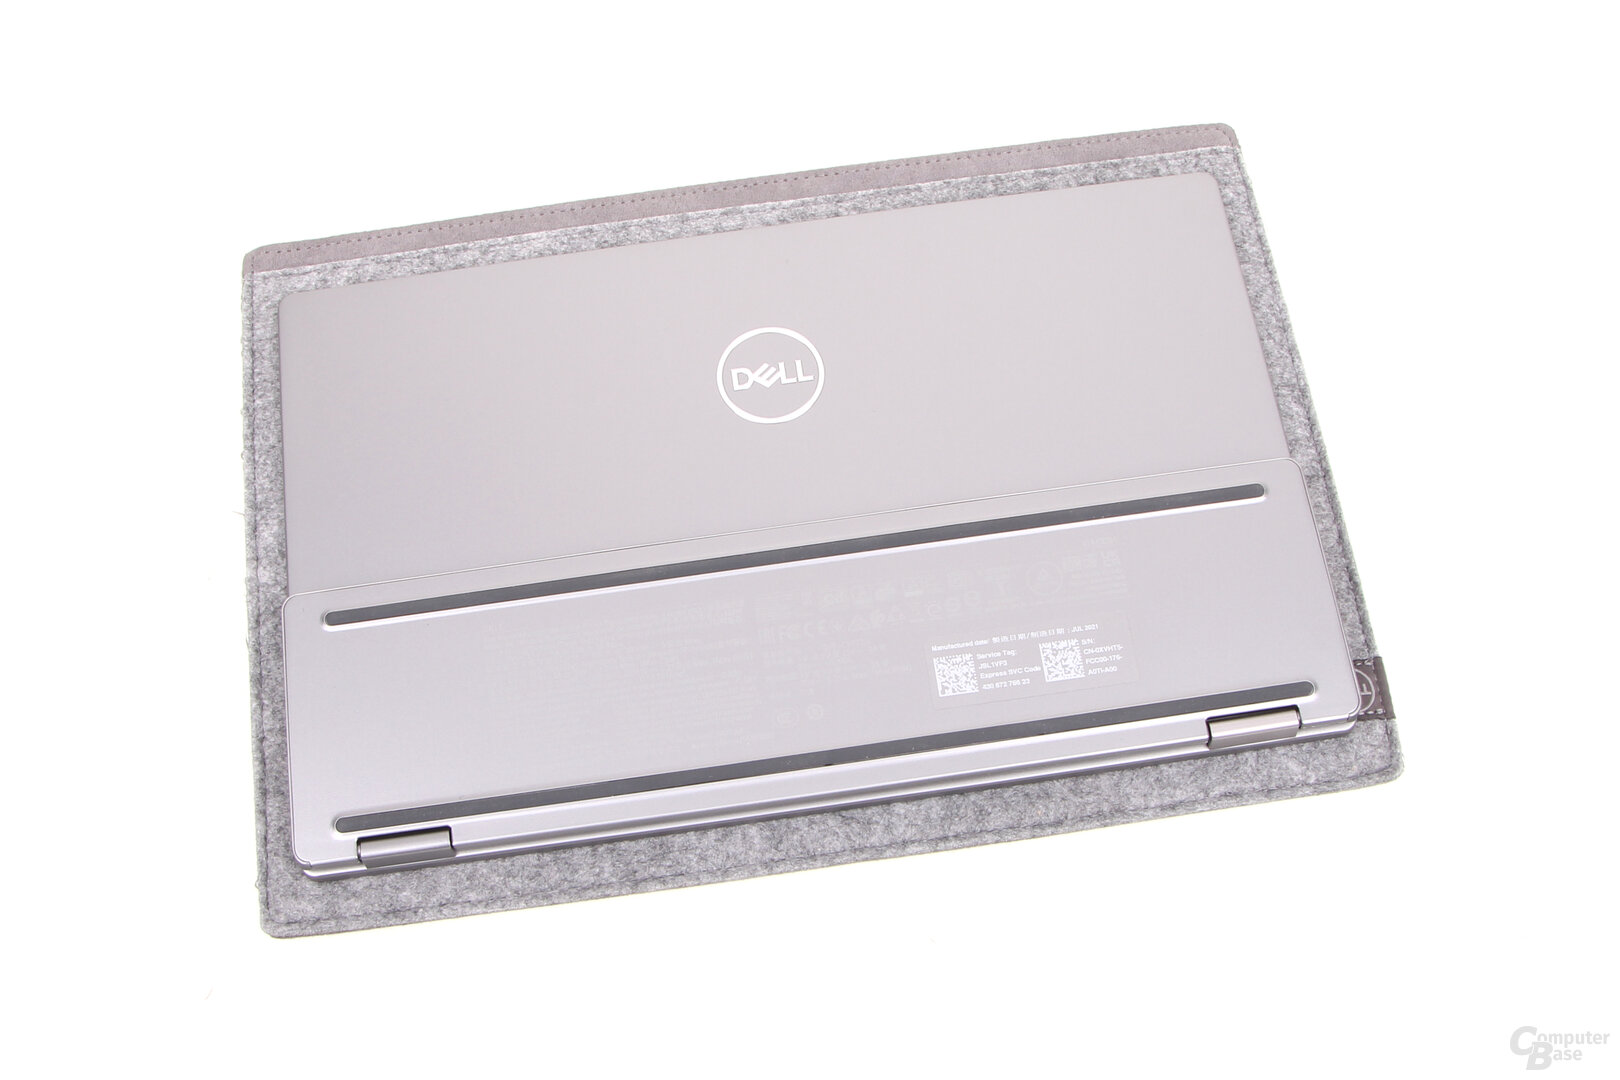 The base of the Dell C1422H does not cover the entire back